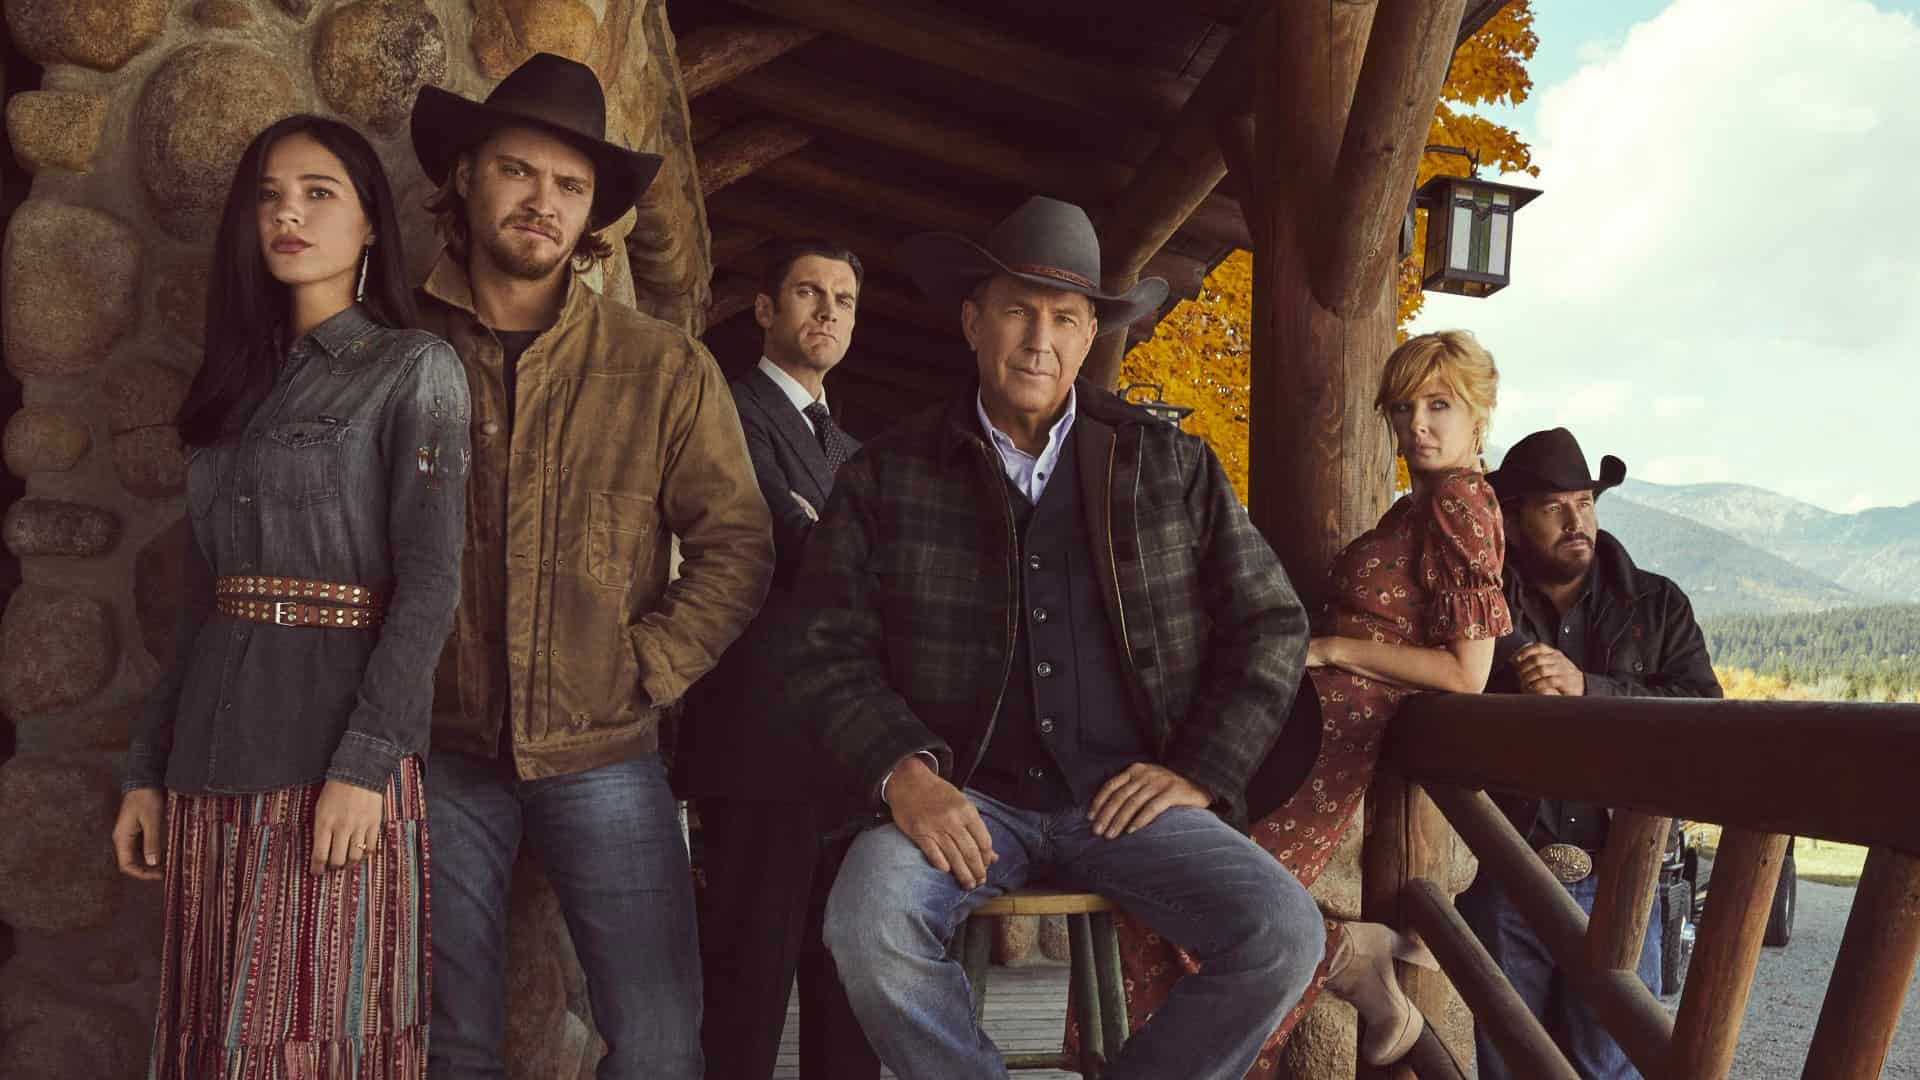 Revealed: Yellowstone's Season 5 Plot Twist - John Dutton's Health Battle and Kevin Costner's Exit Explained